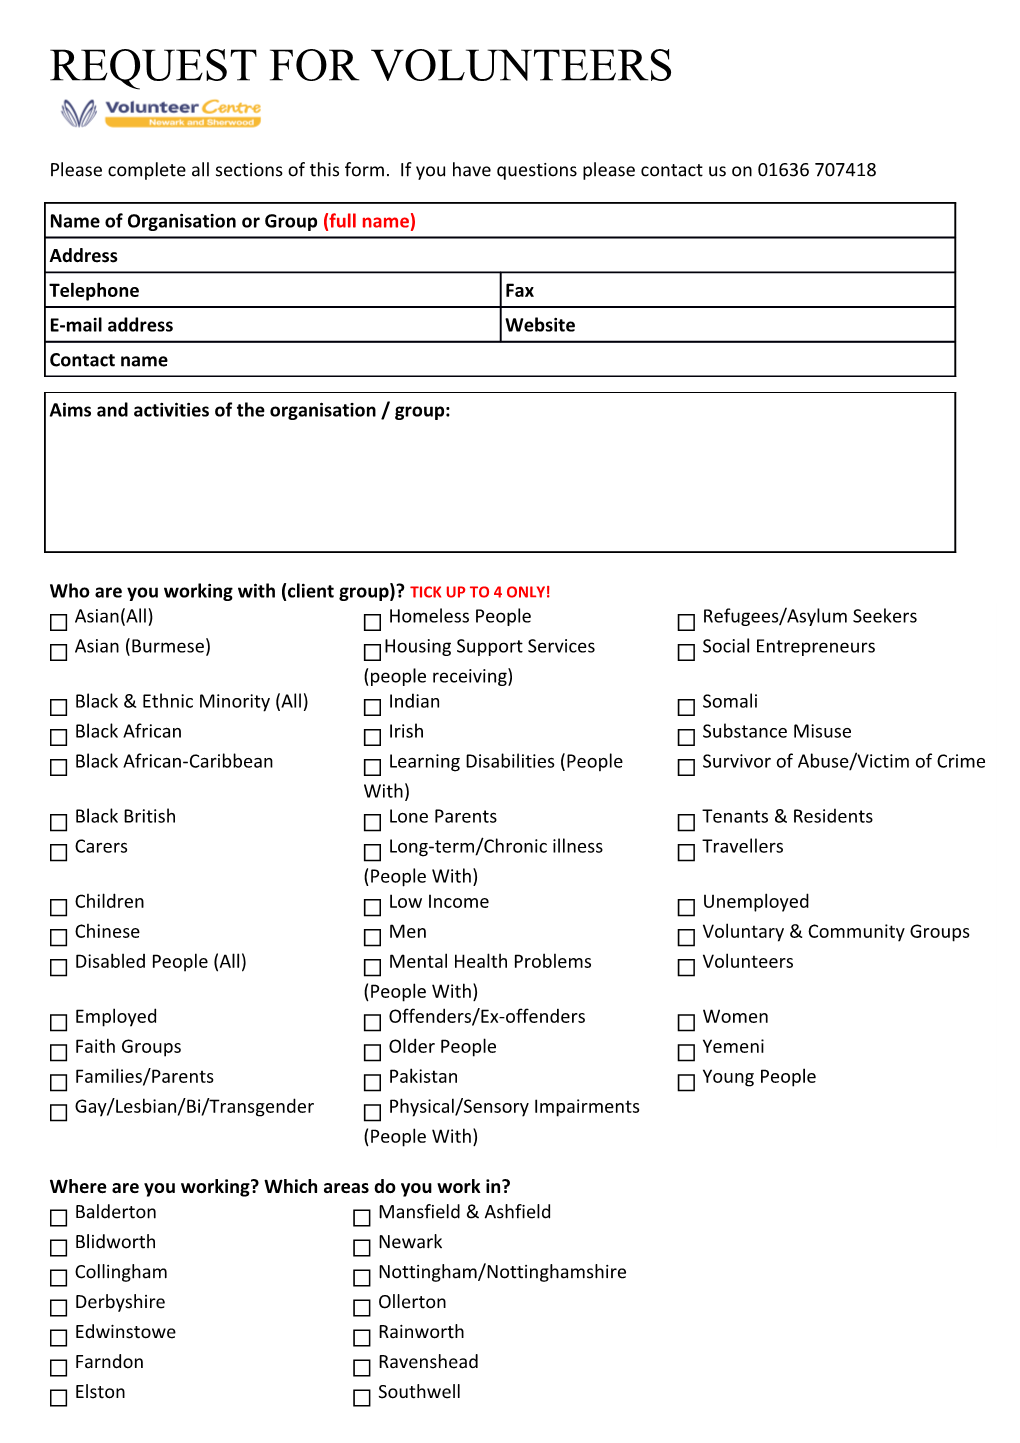 Please Complete All Sections of This Form